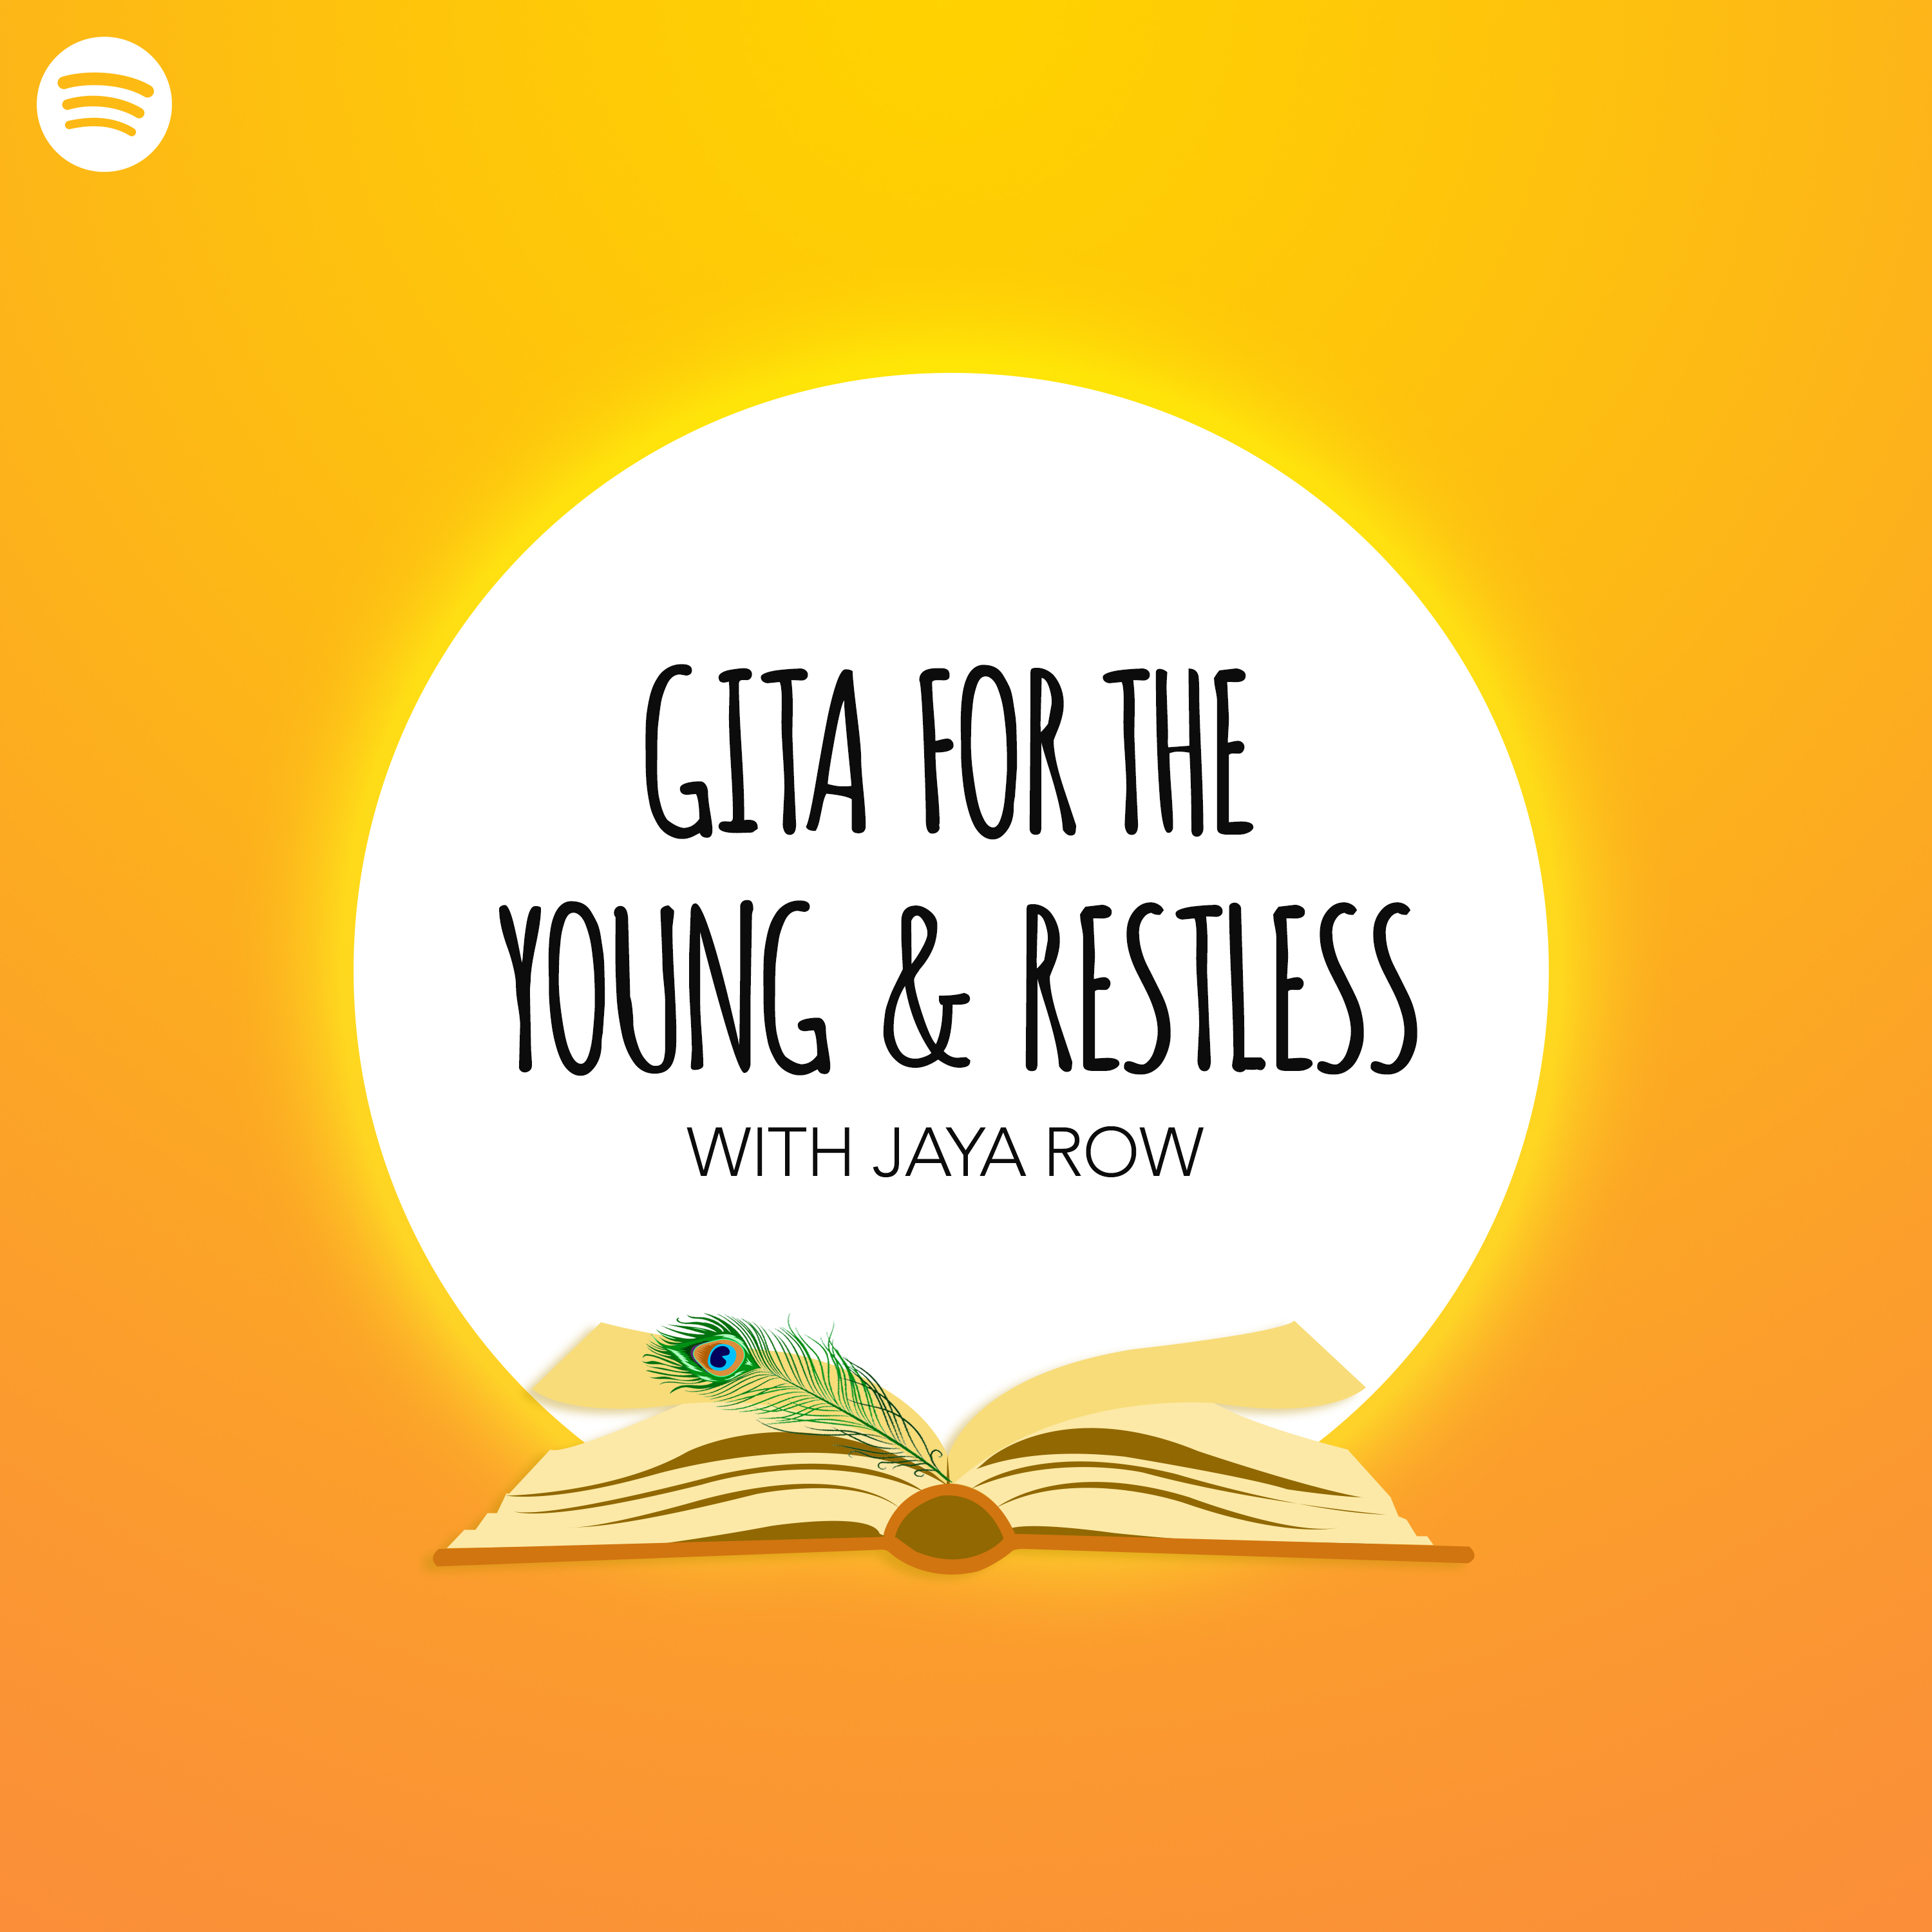 Gita For The Young And Restless by Jaya Row